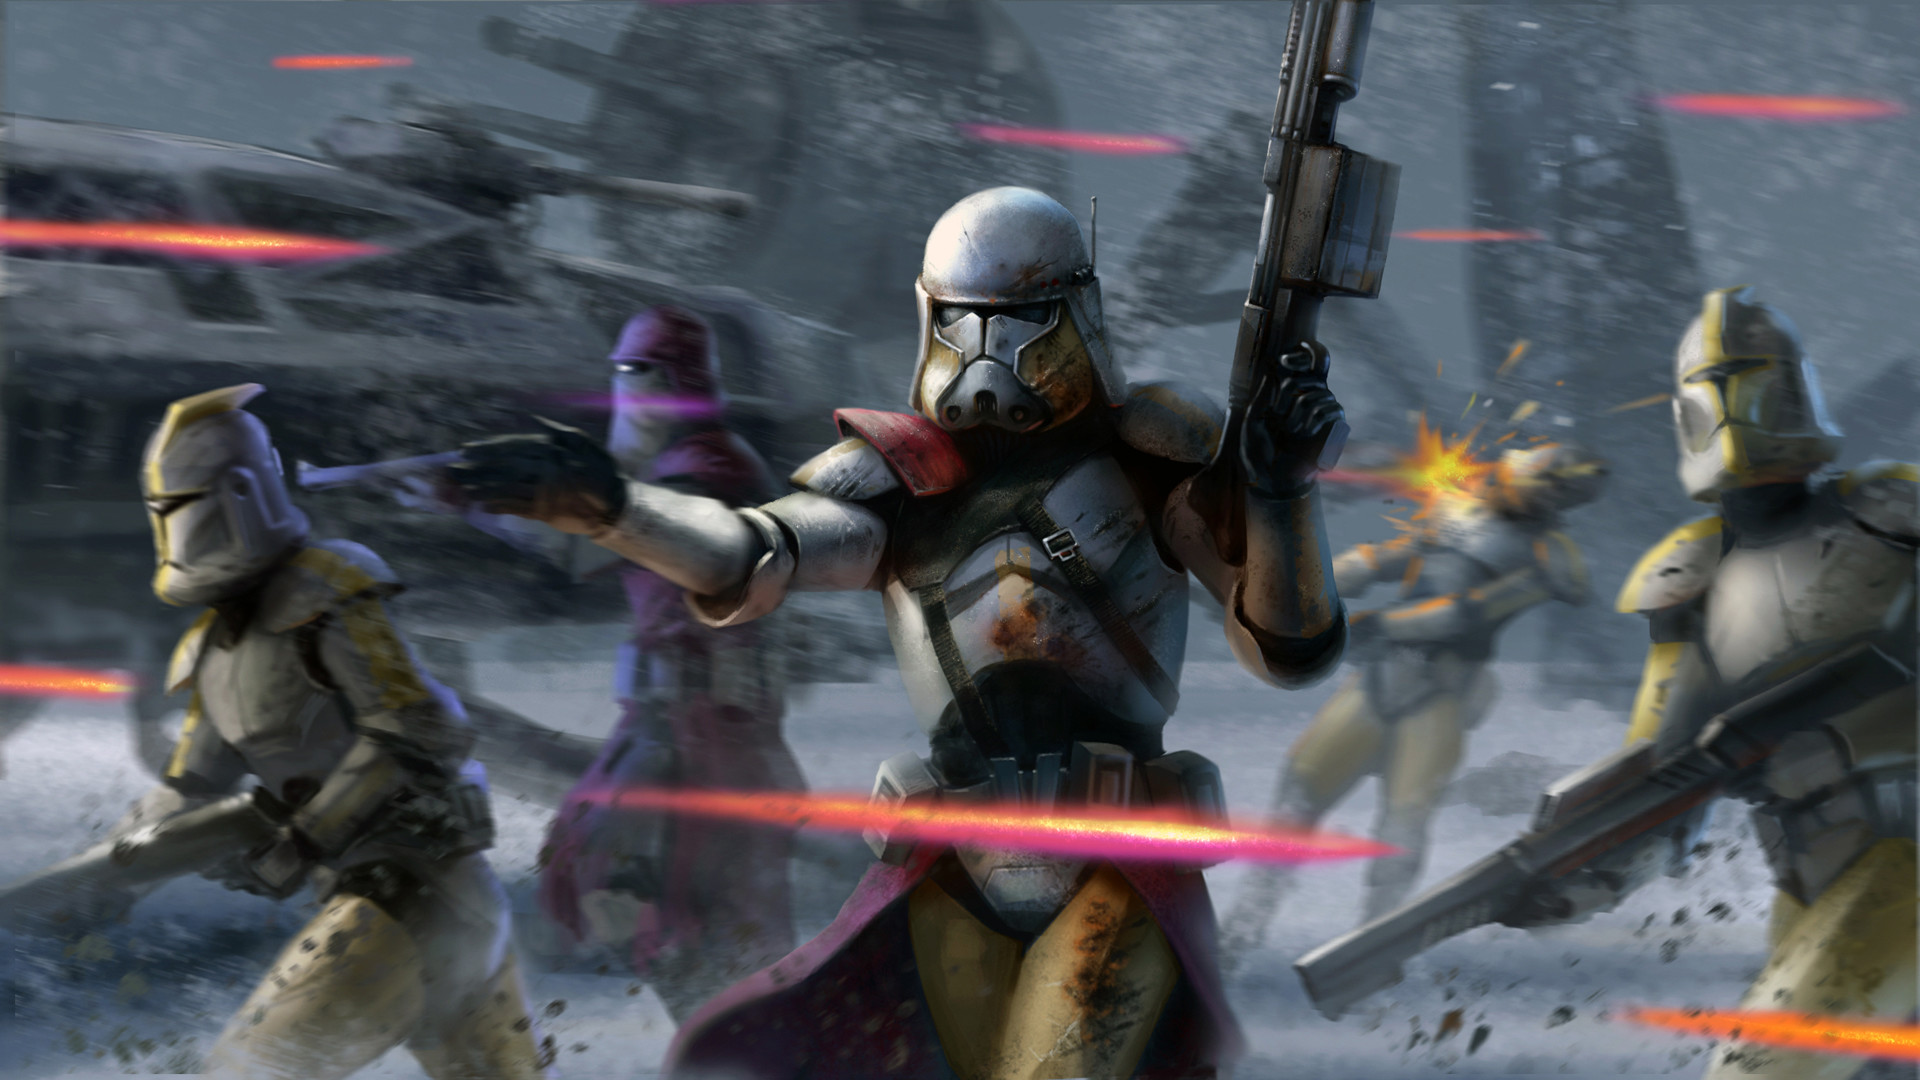 Clone Wars Wallpaper background picture